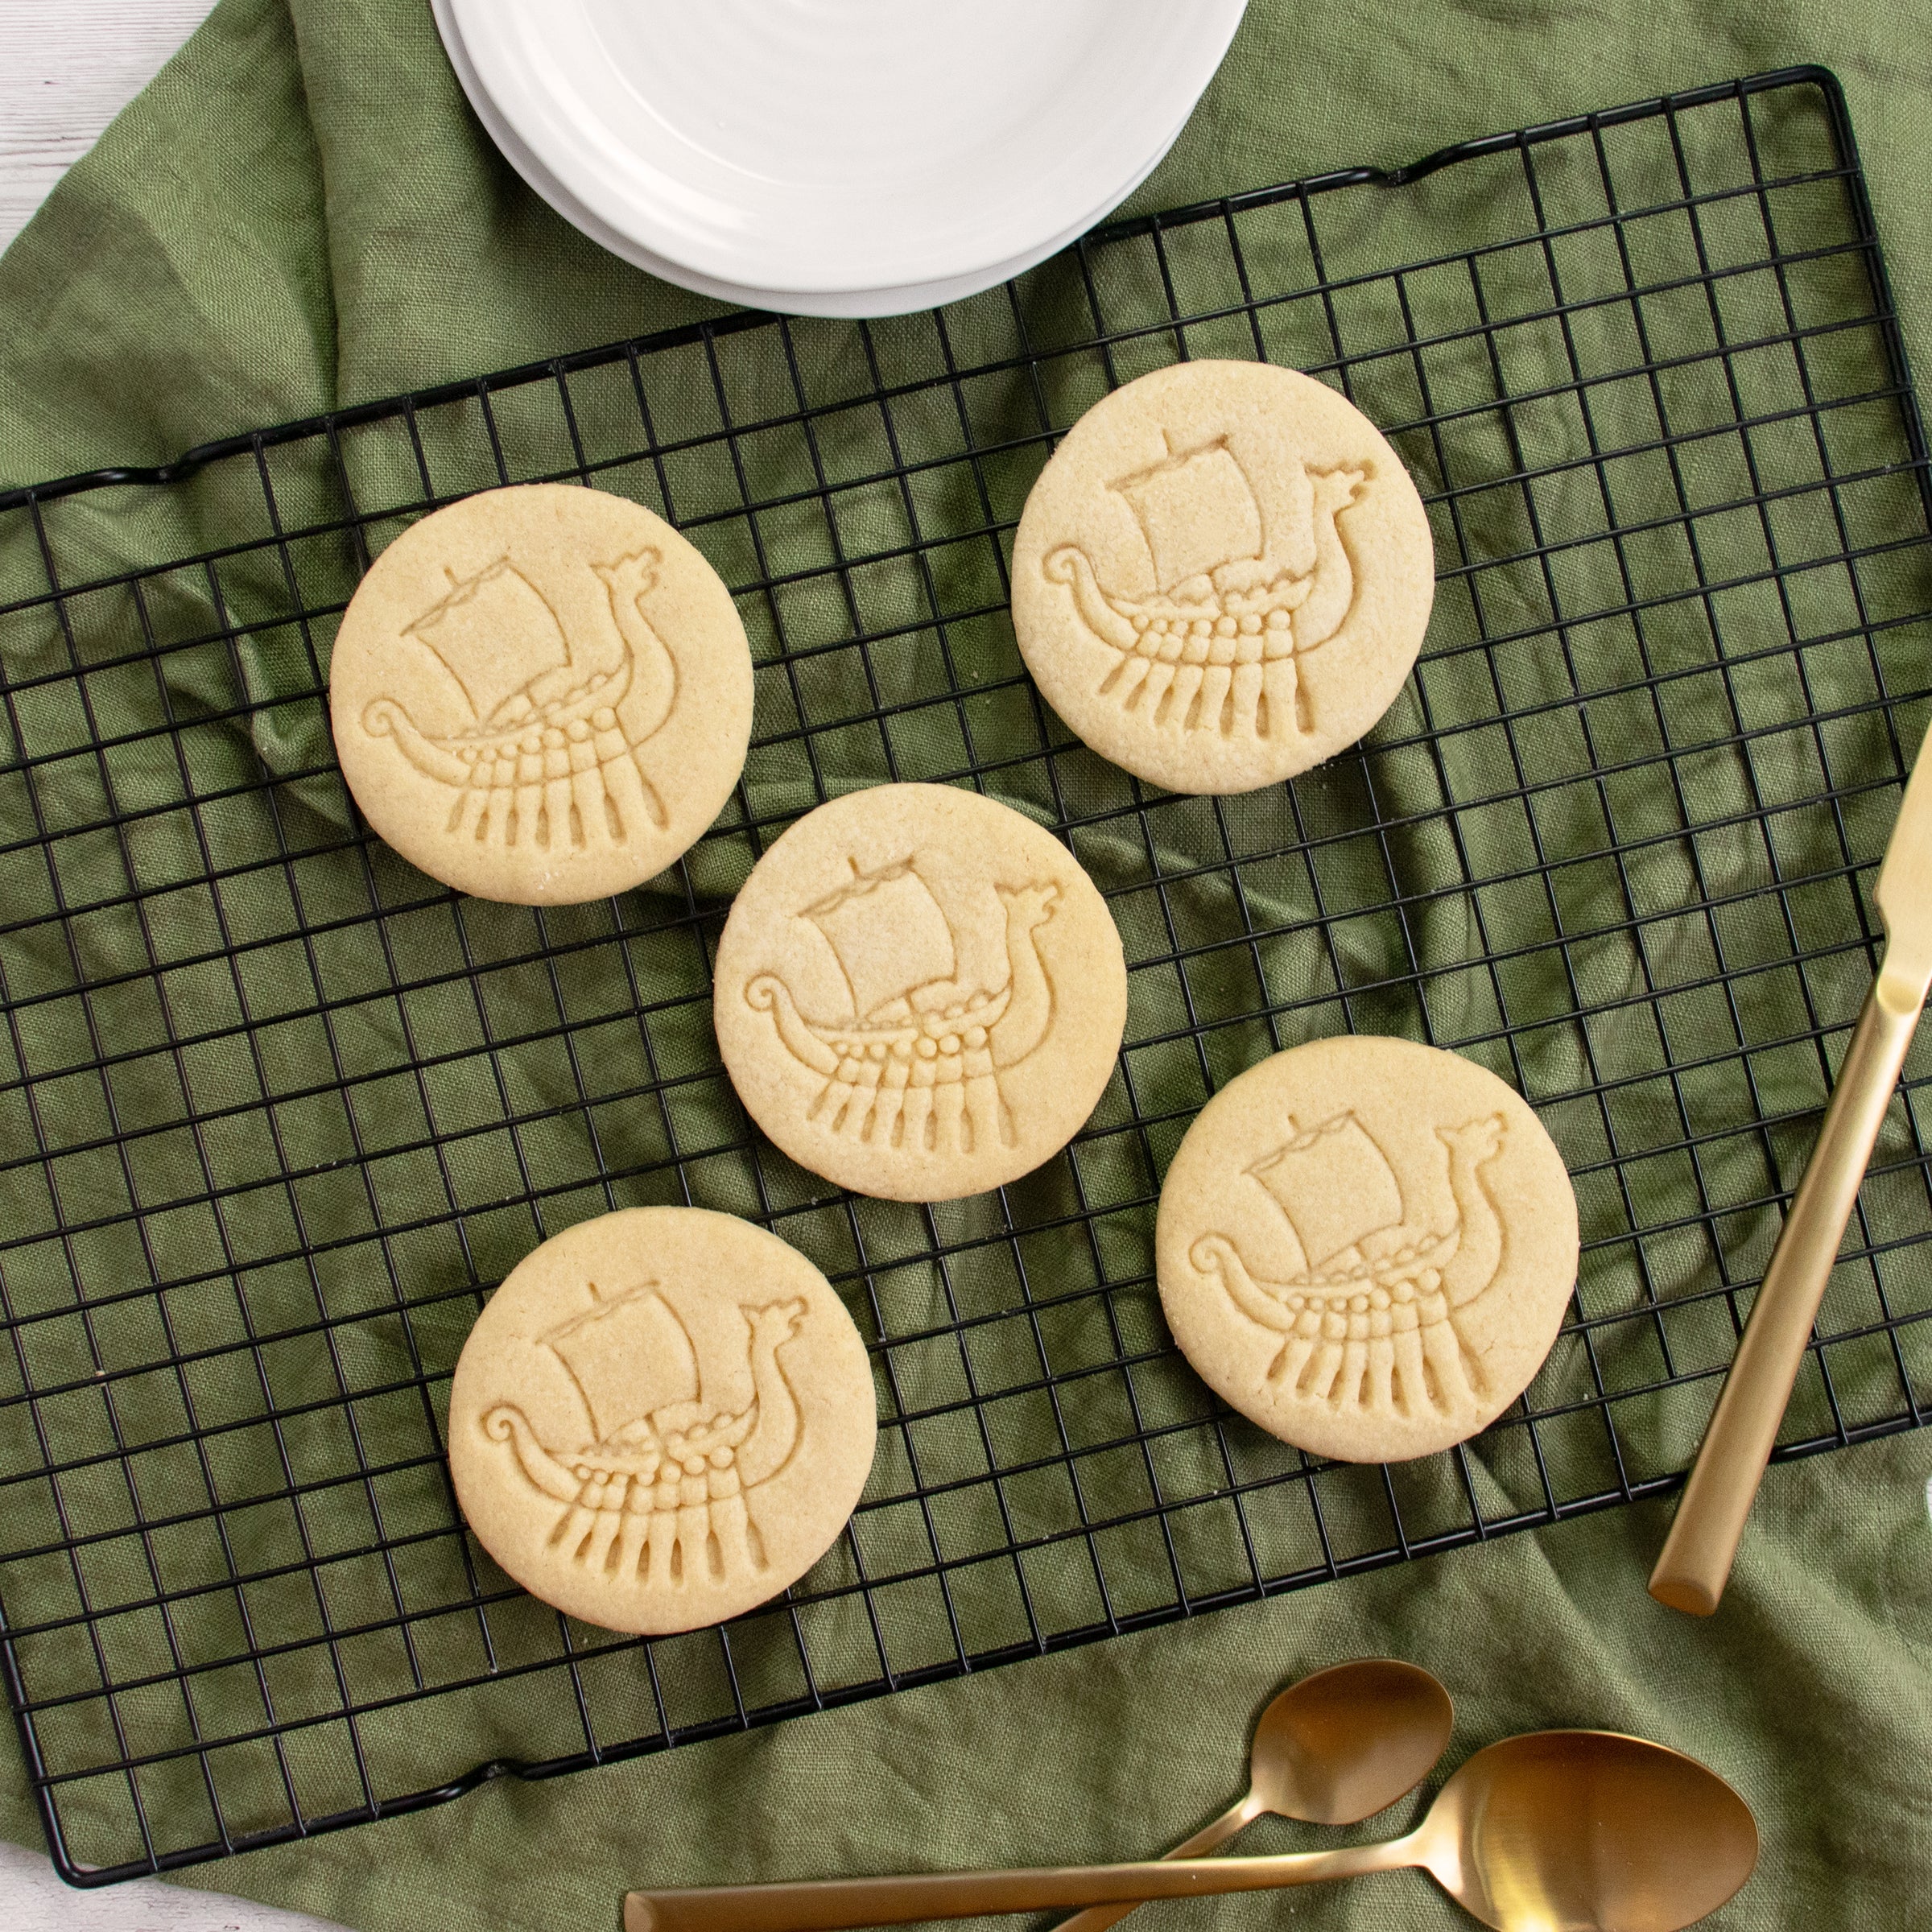 Nordic Ware Pretty Pleated Cookie Stamps & Reviews